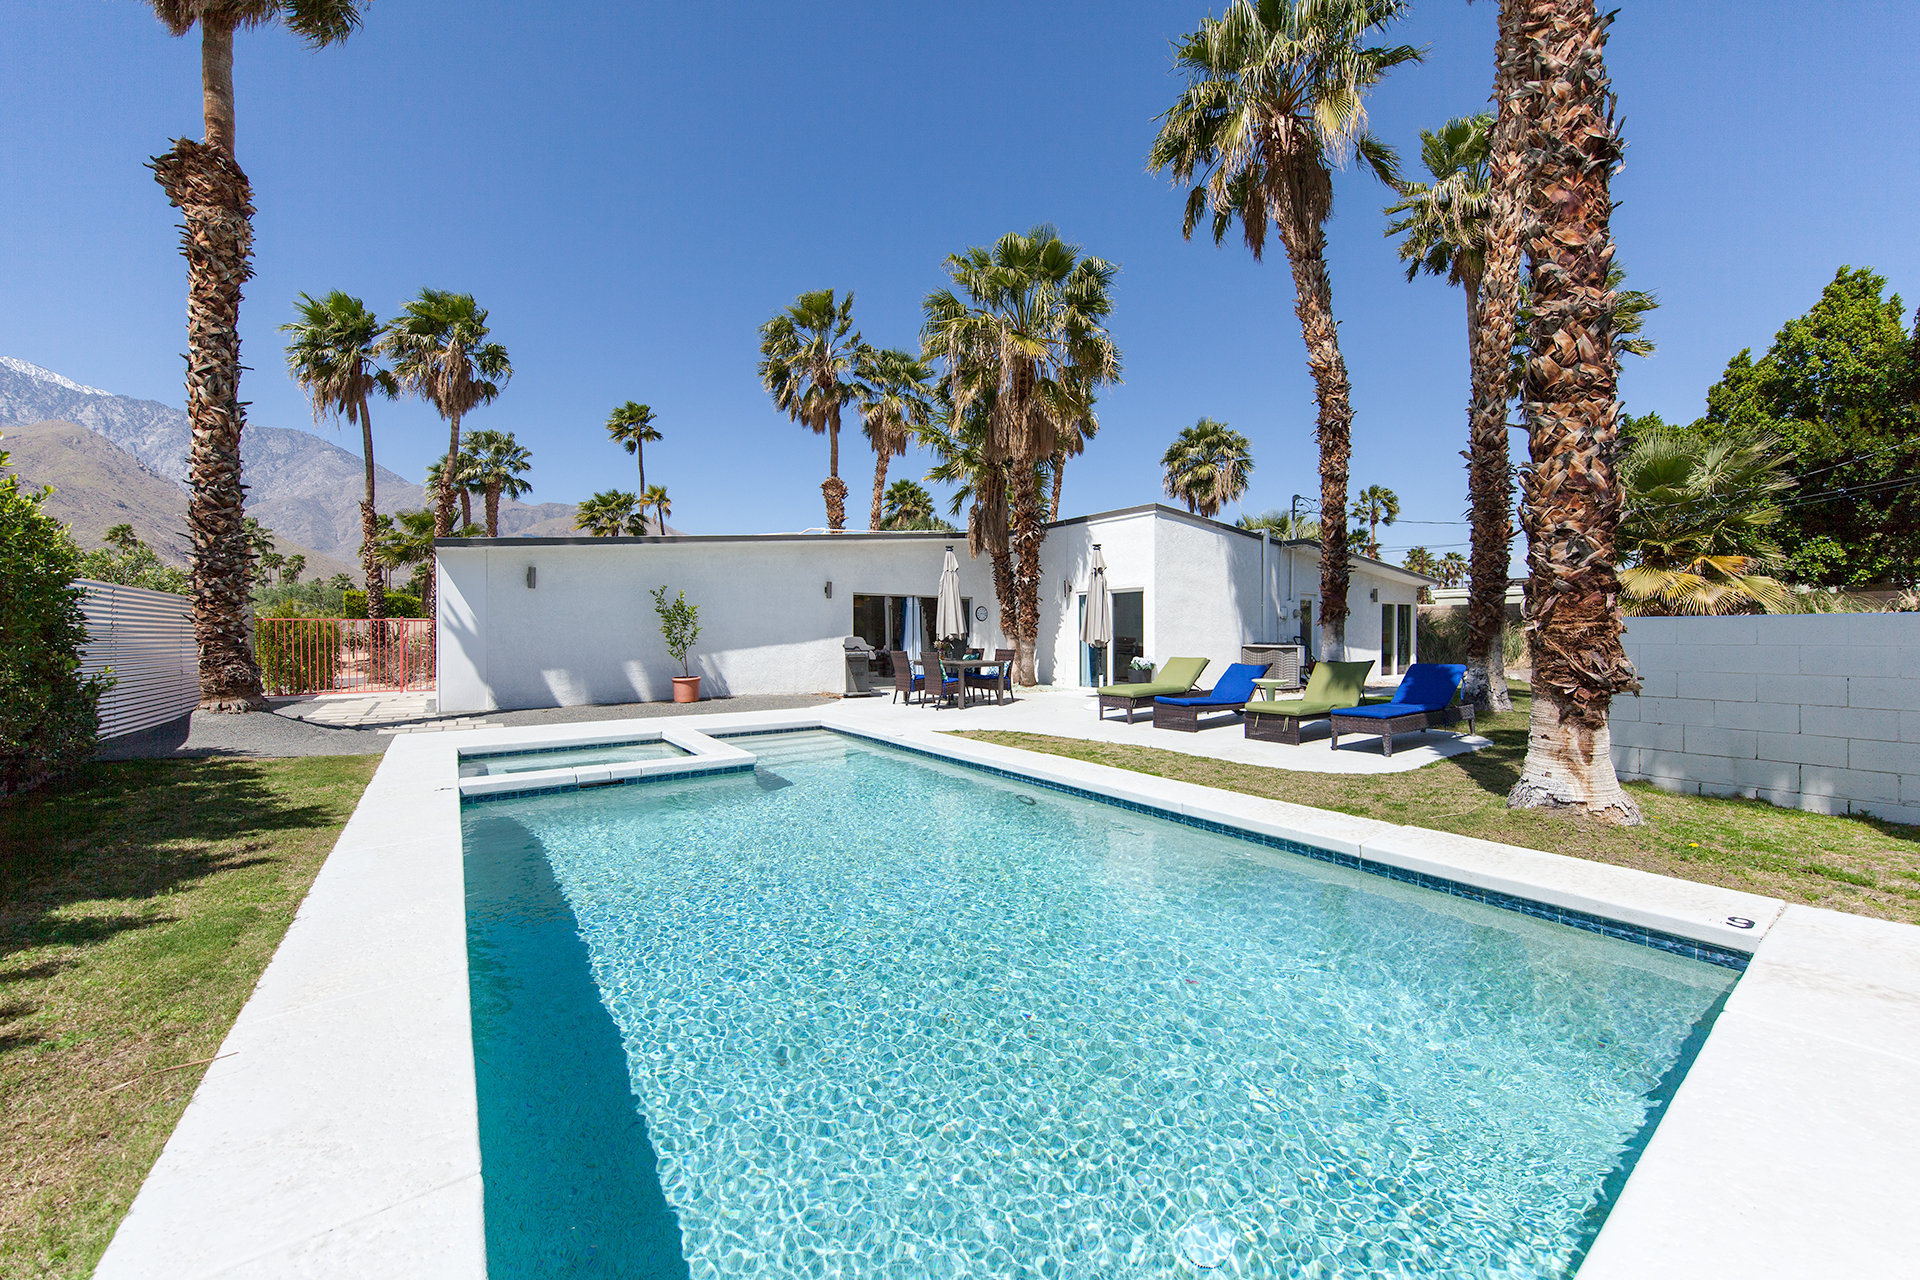 A backyard pool and mid-century modern home in Racquet Club Estates, Palm Springs, CA